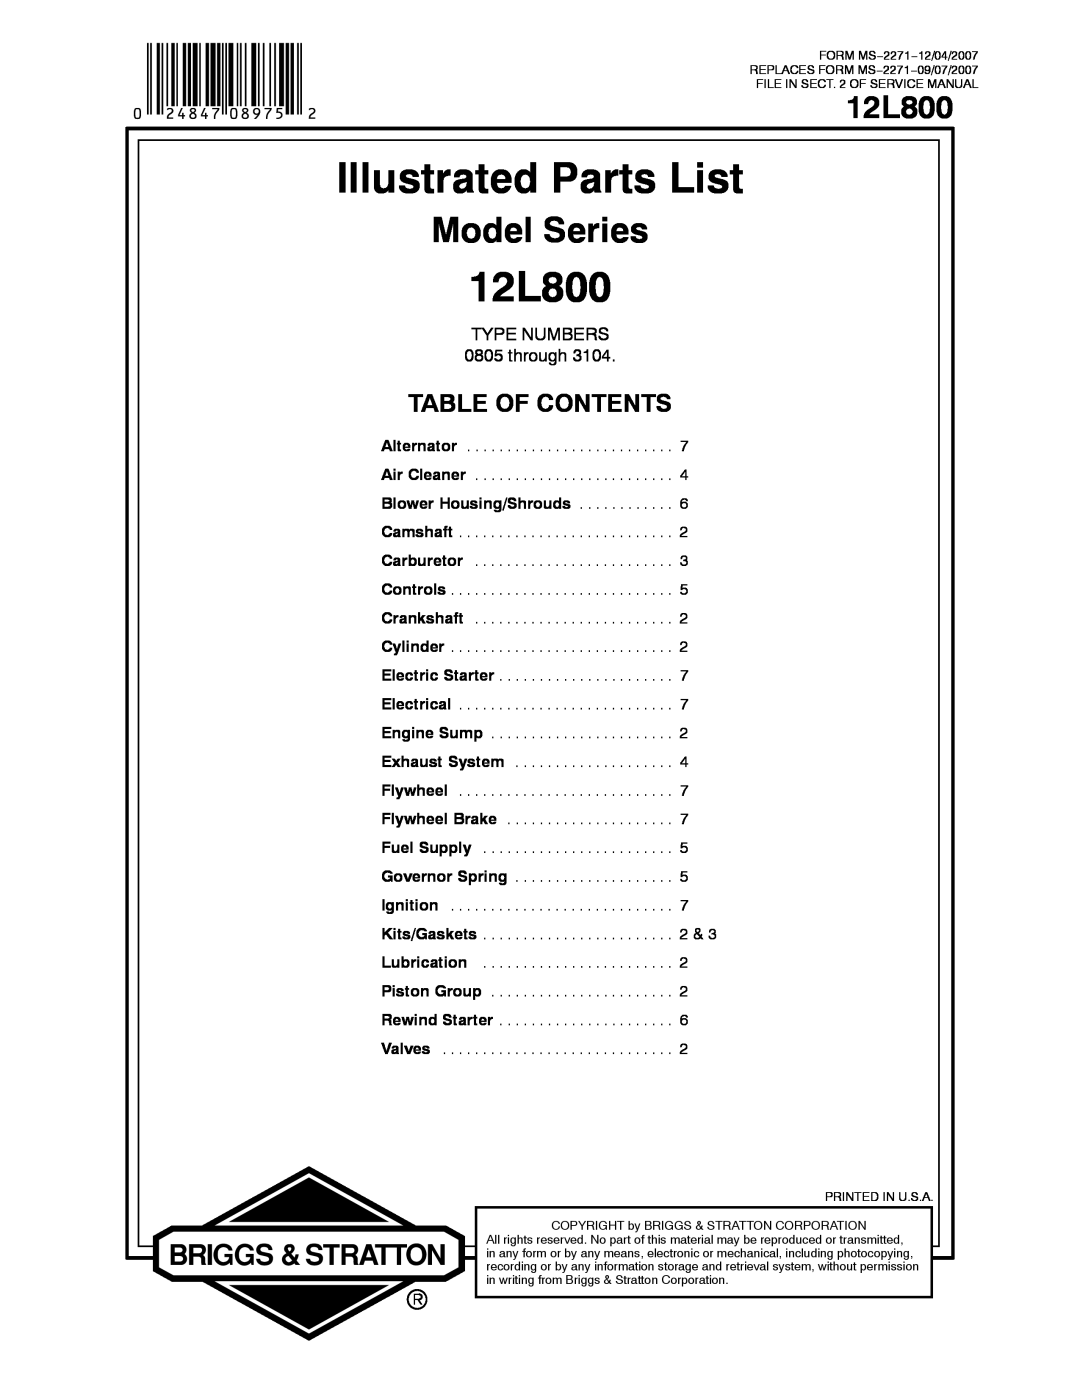 Briggs & Stratton 12L800 service manual Illustrated Parts List, Model Series, Table Of Contents, TYPE NUMBERS 0805 through 